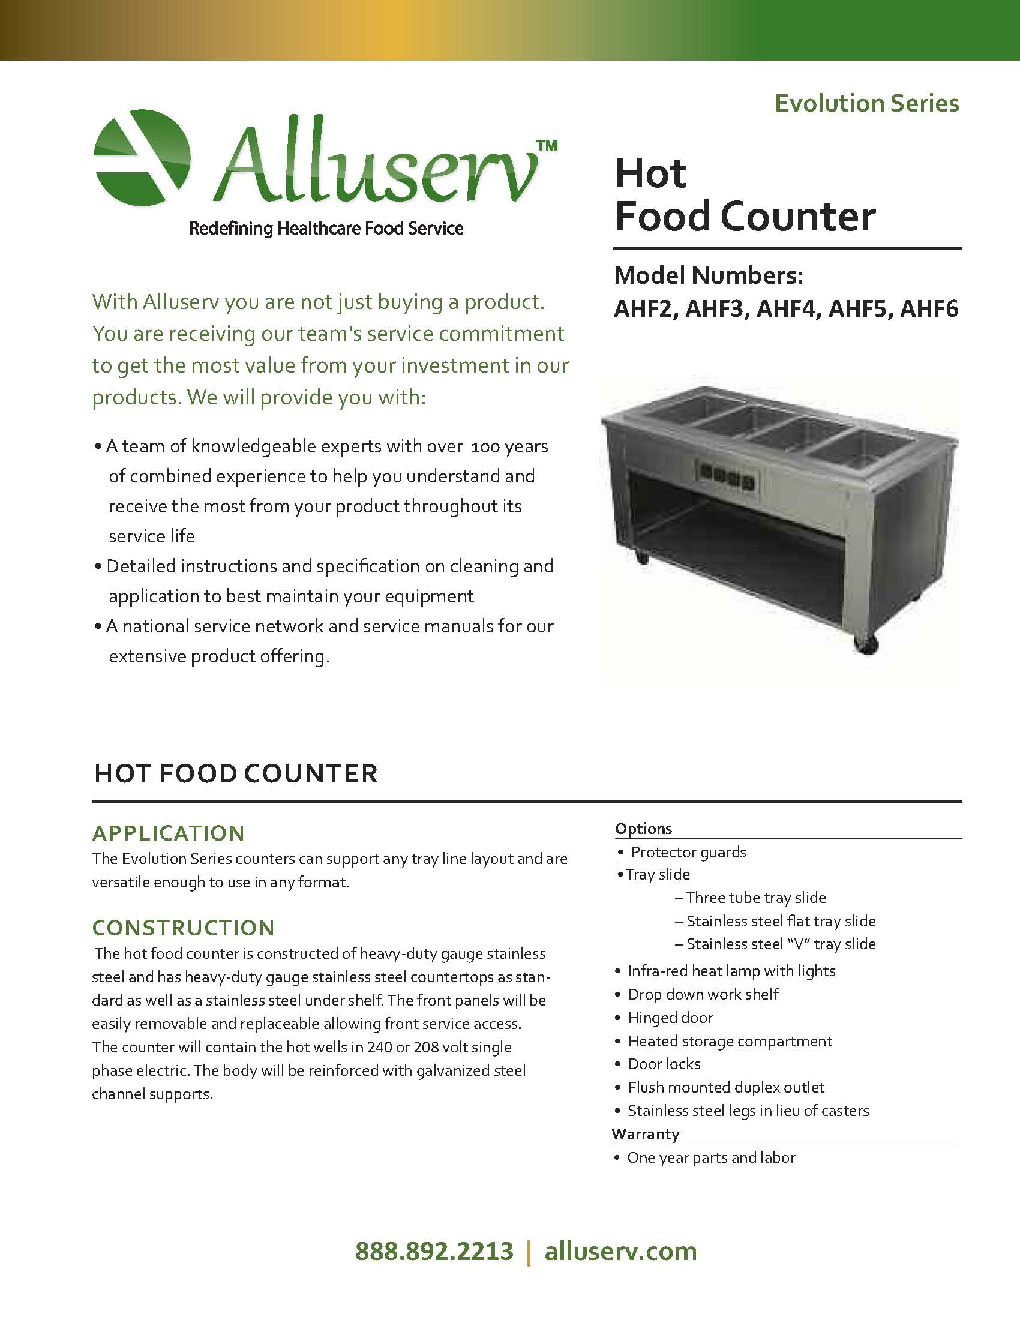 Alluserv AHF4 Electric Hot Food Serving Counter